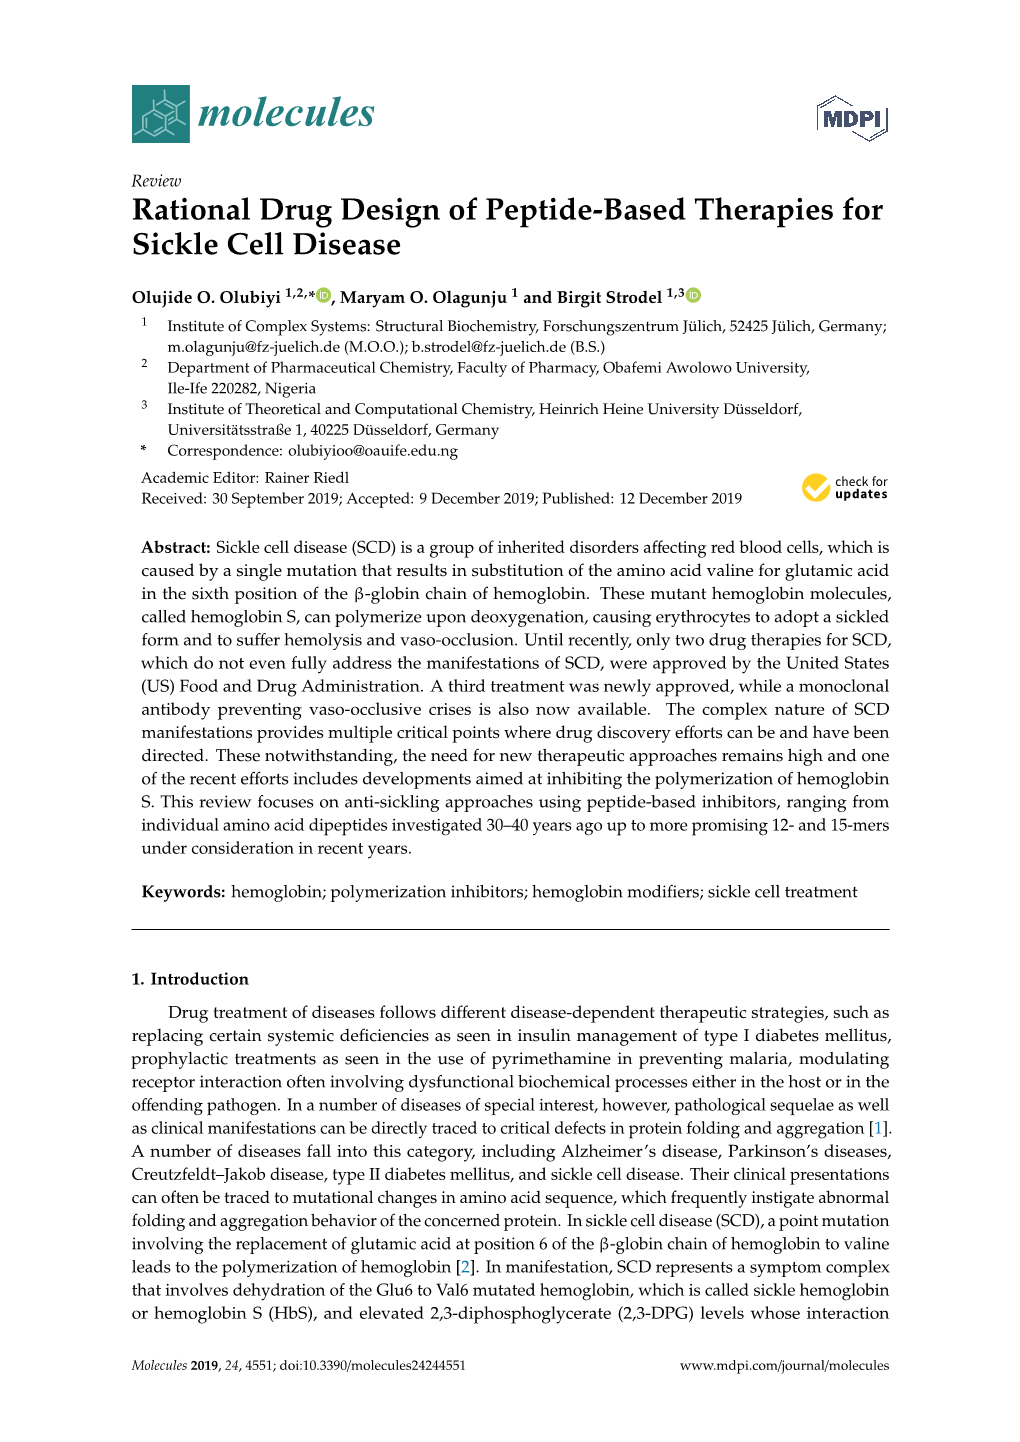 Rational Drug Design of Peptide-Based Therapies for Sickle Cell Disease